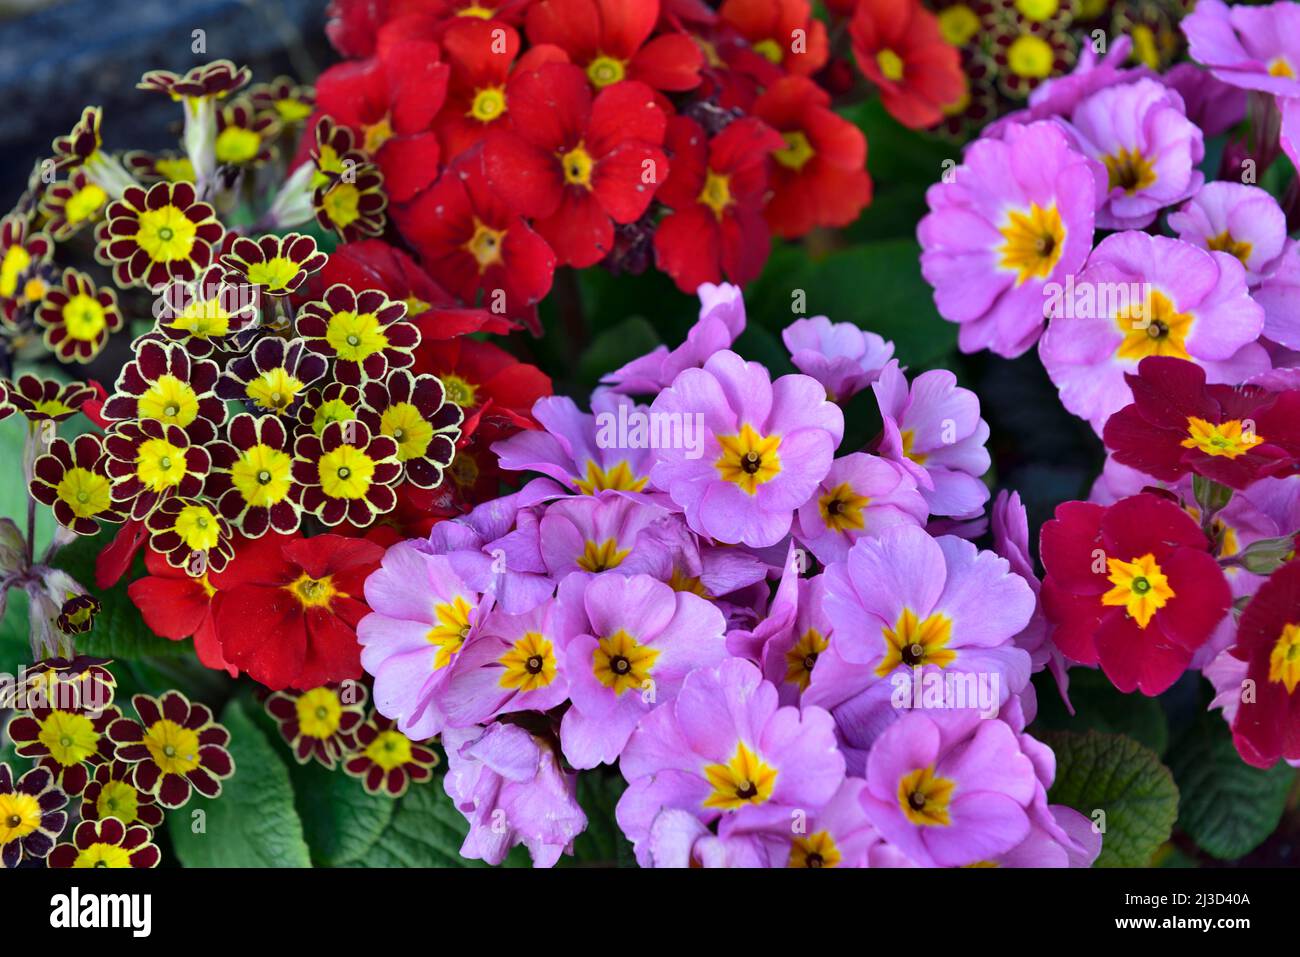 Colourful display of polyanthus and auricula blooms in pot Stock Photo